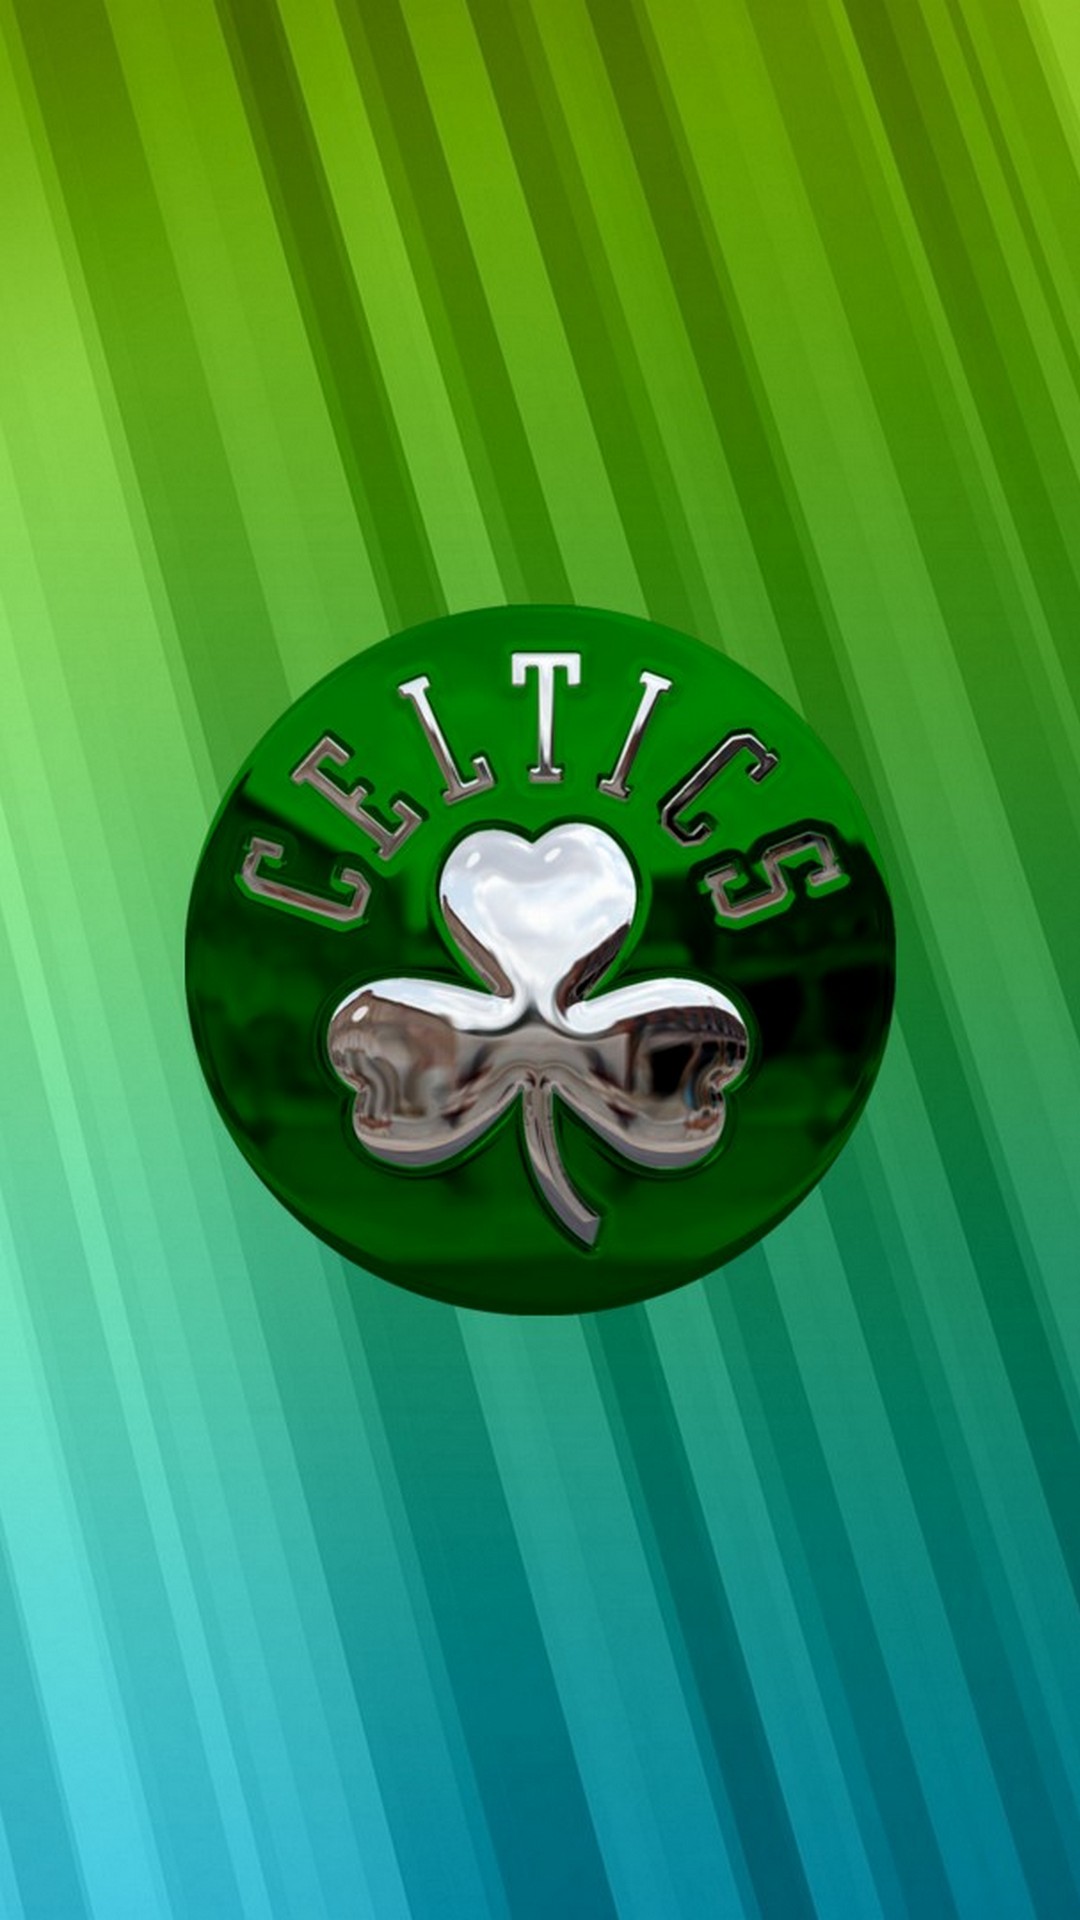 iPhone Wallpaper Boston Celtics Logo with image resolution 1080x1920 pixel. You can make this wallpaper for your iPhone 5, 6, 7, 8, X backgrounds, Mobile Screensaver, or iPad Lock Screen